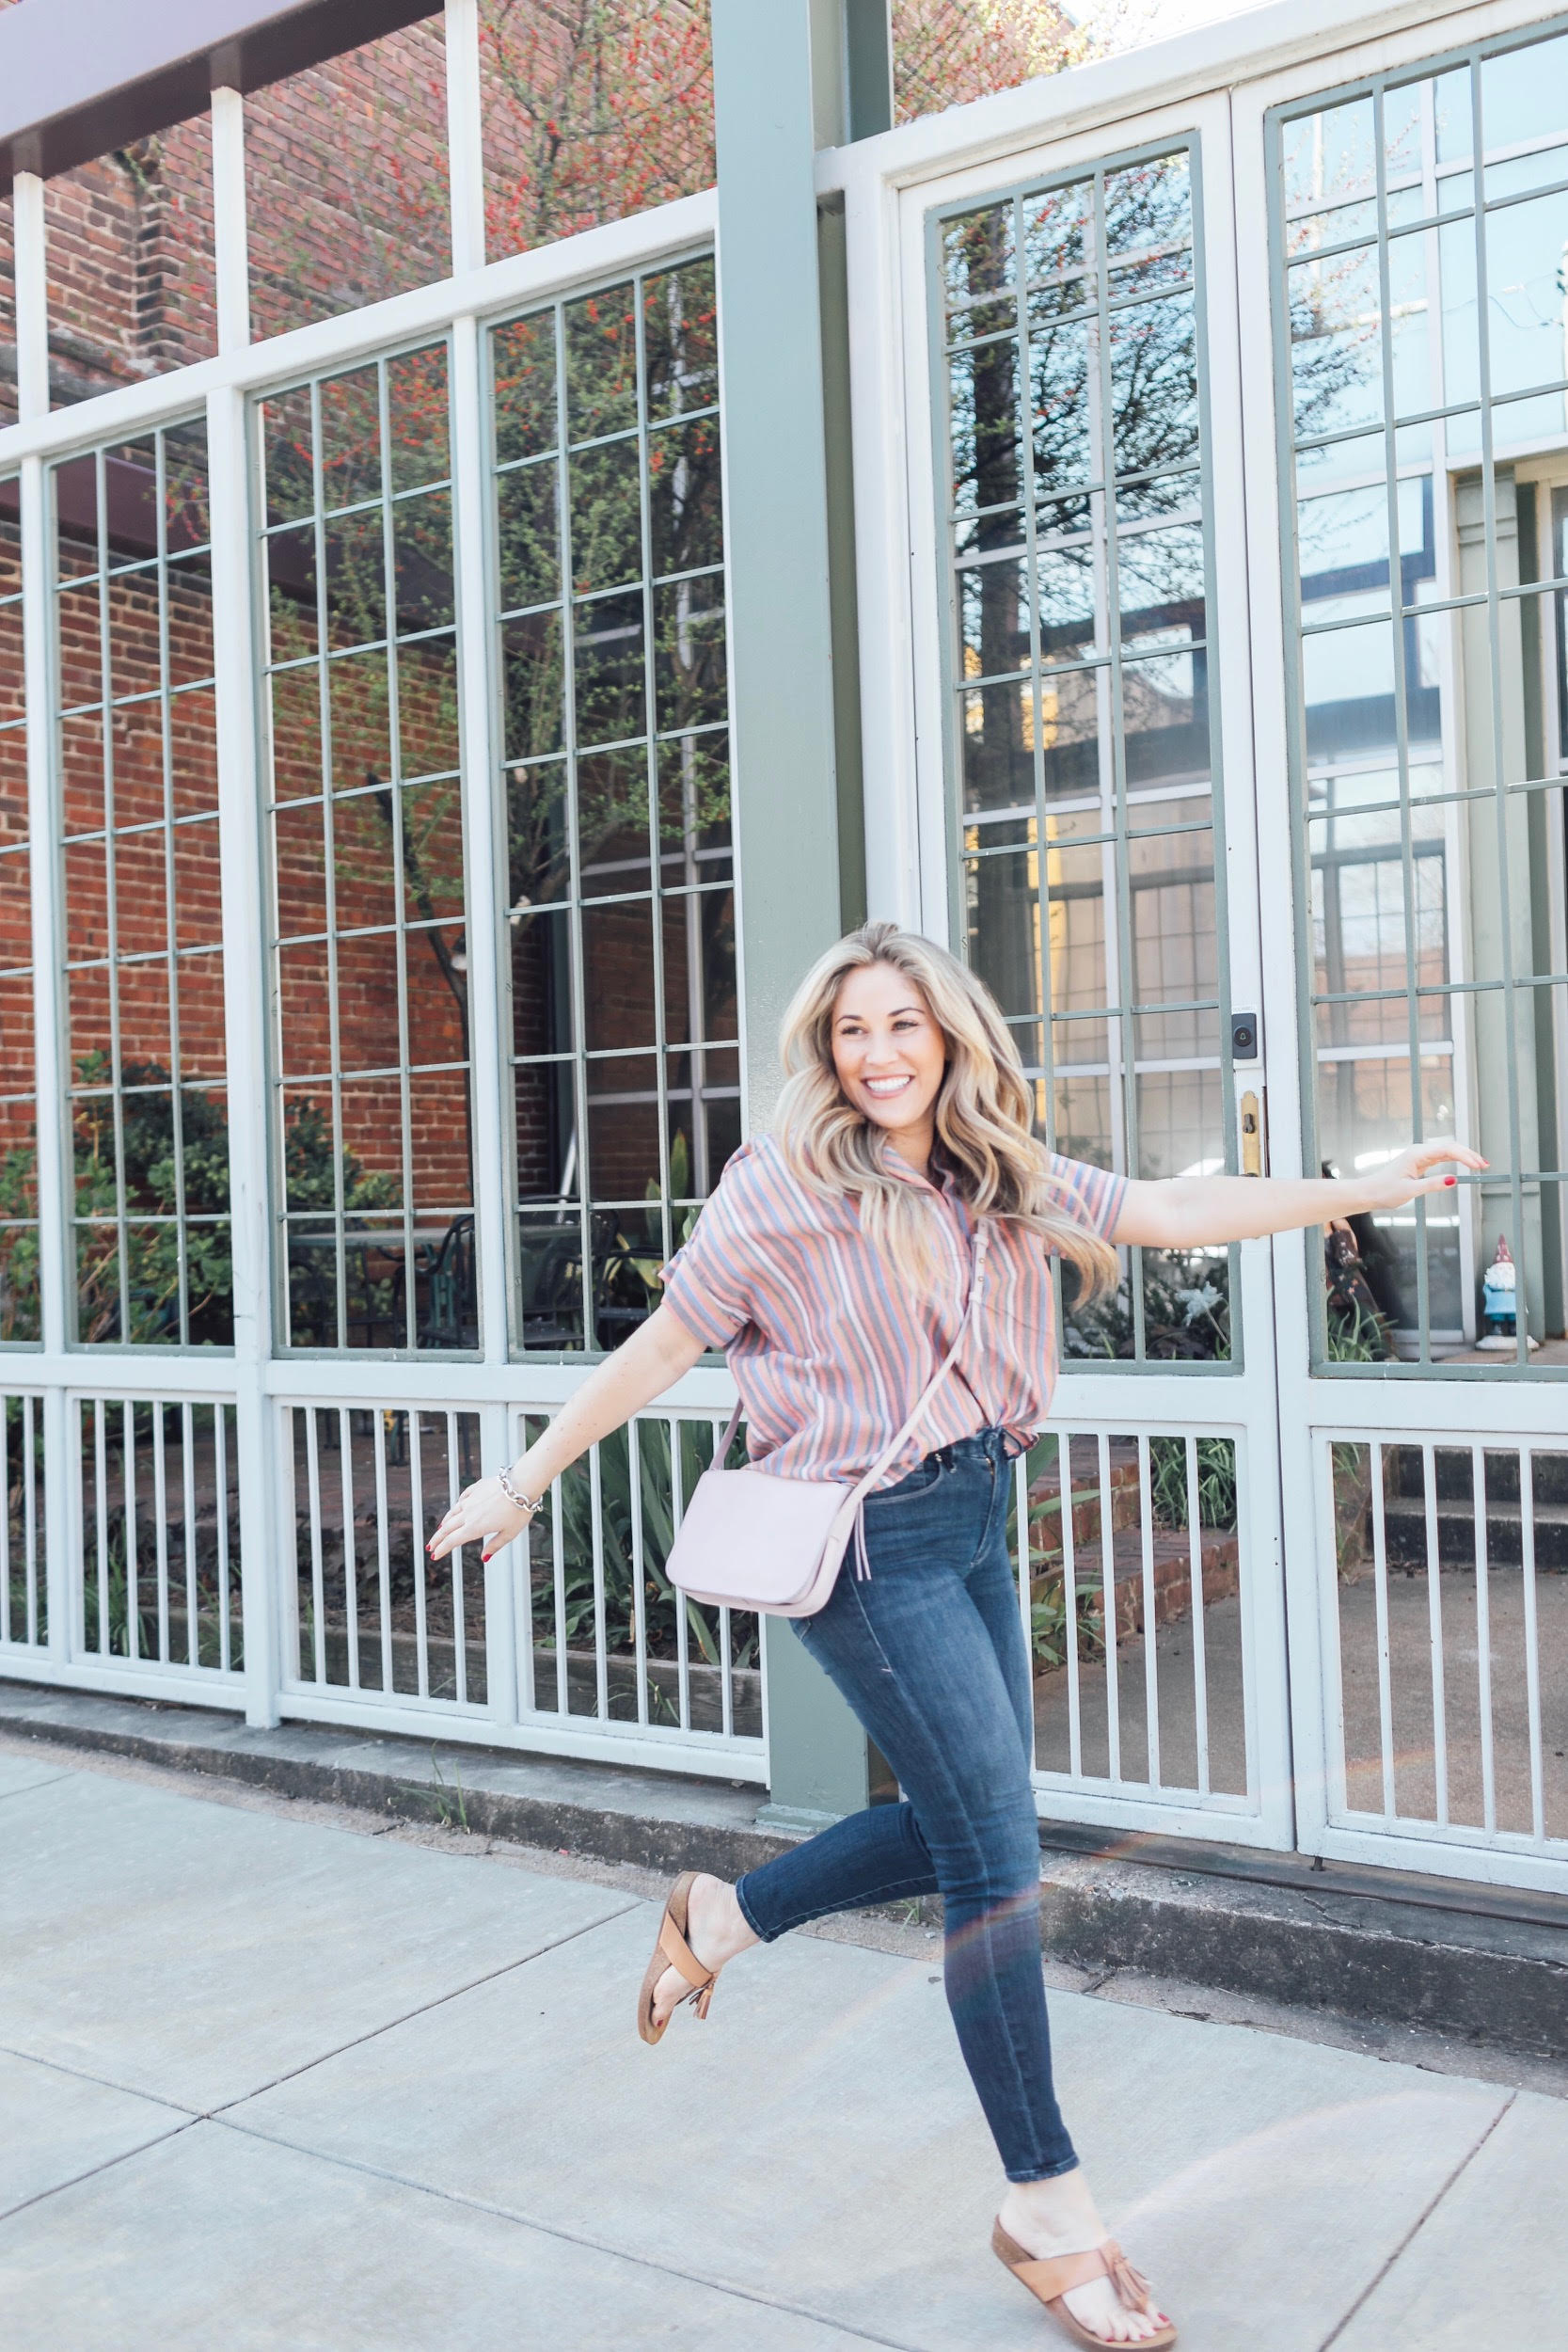 Personal Goals for 2020 featured by top Memphis lifestyle blog, Walking in Memphis in High Heels.